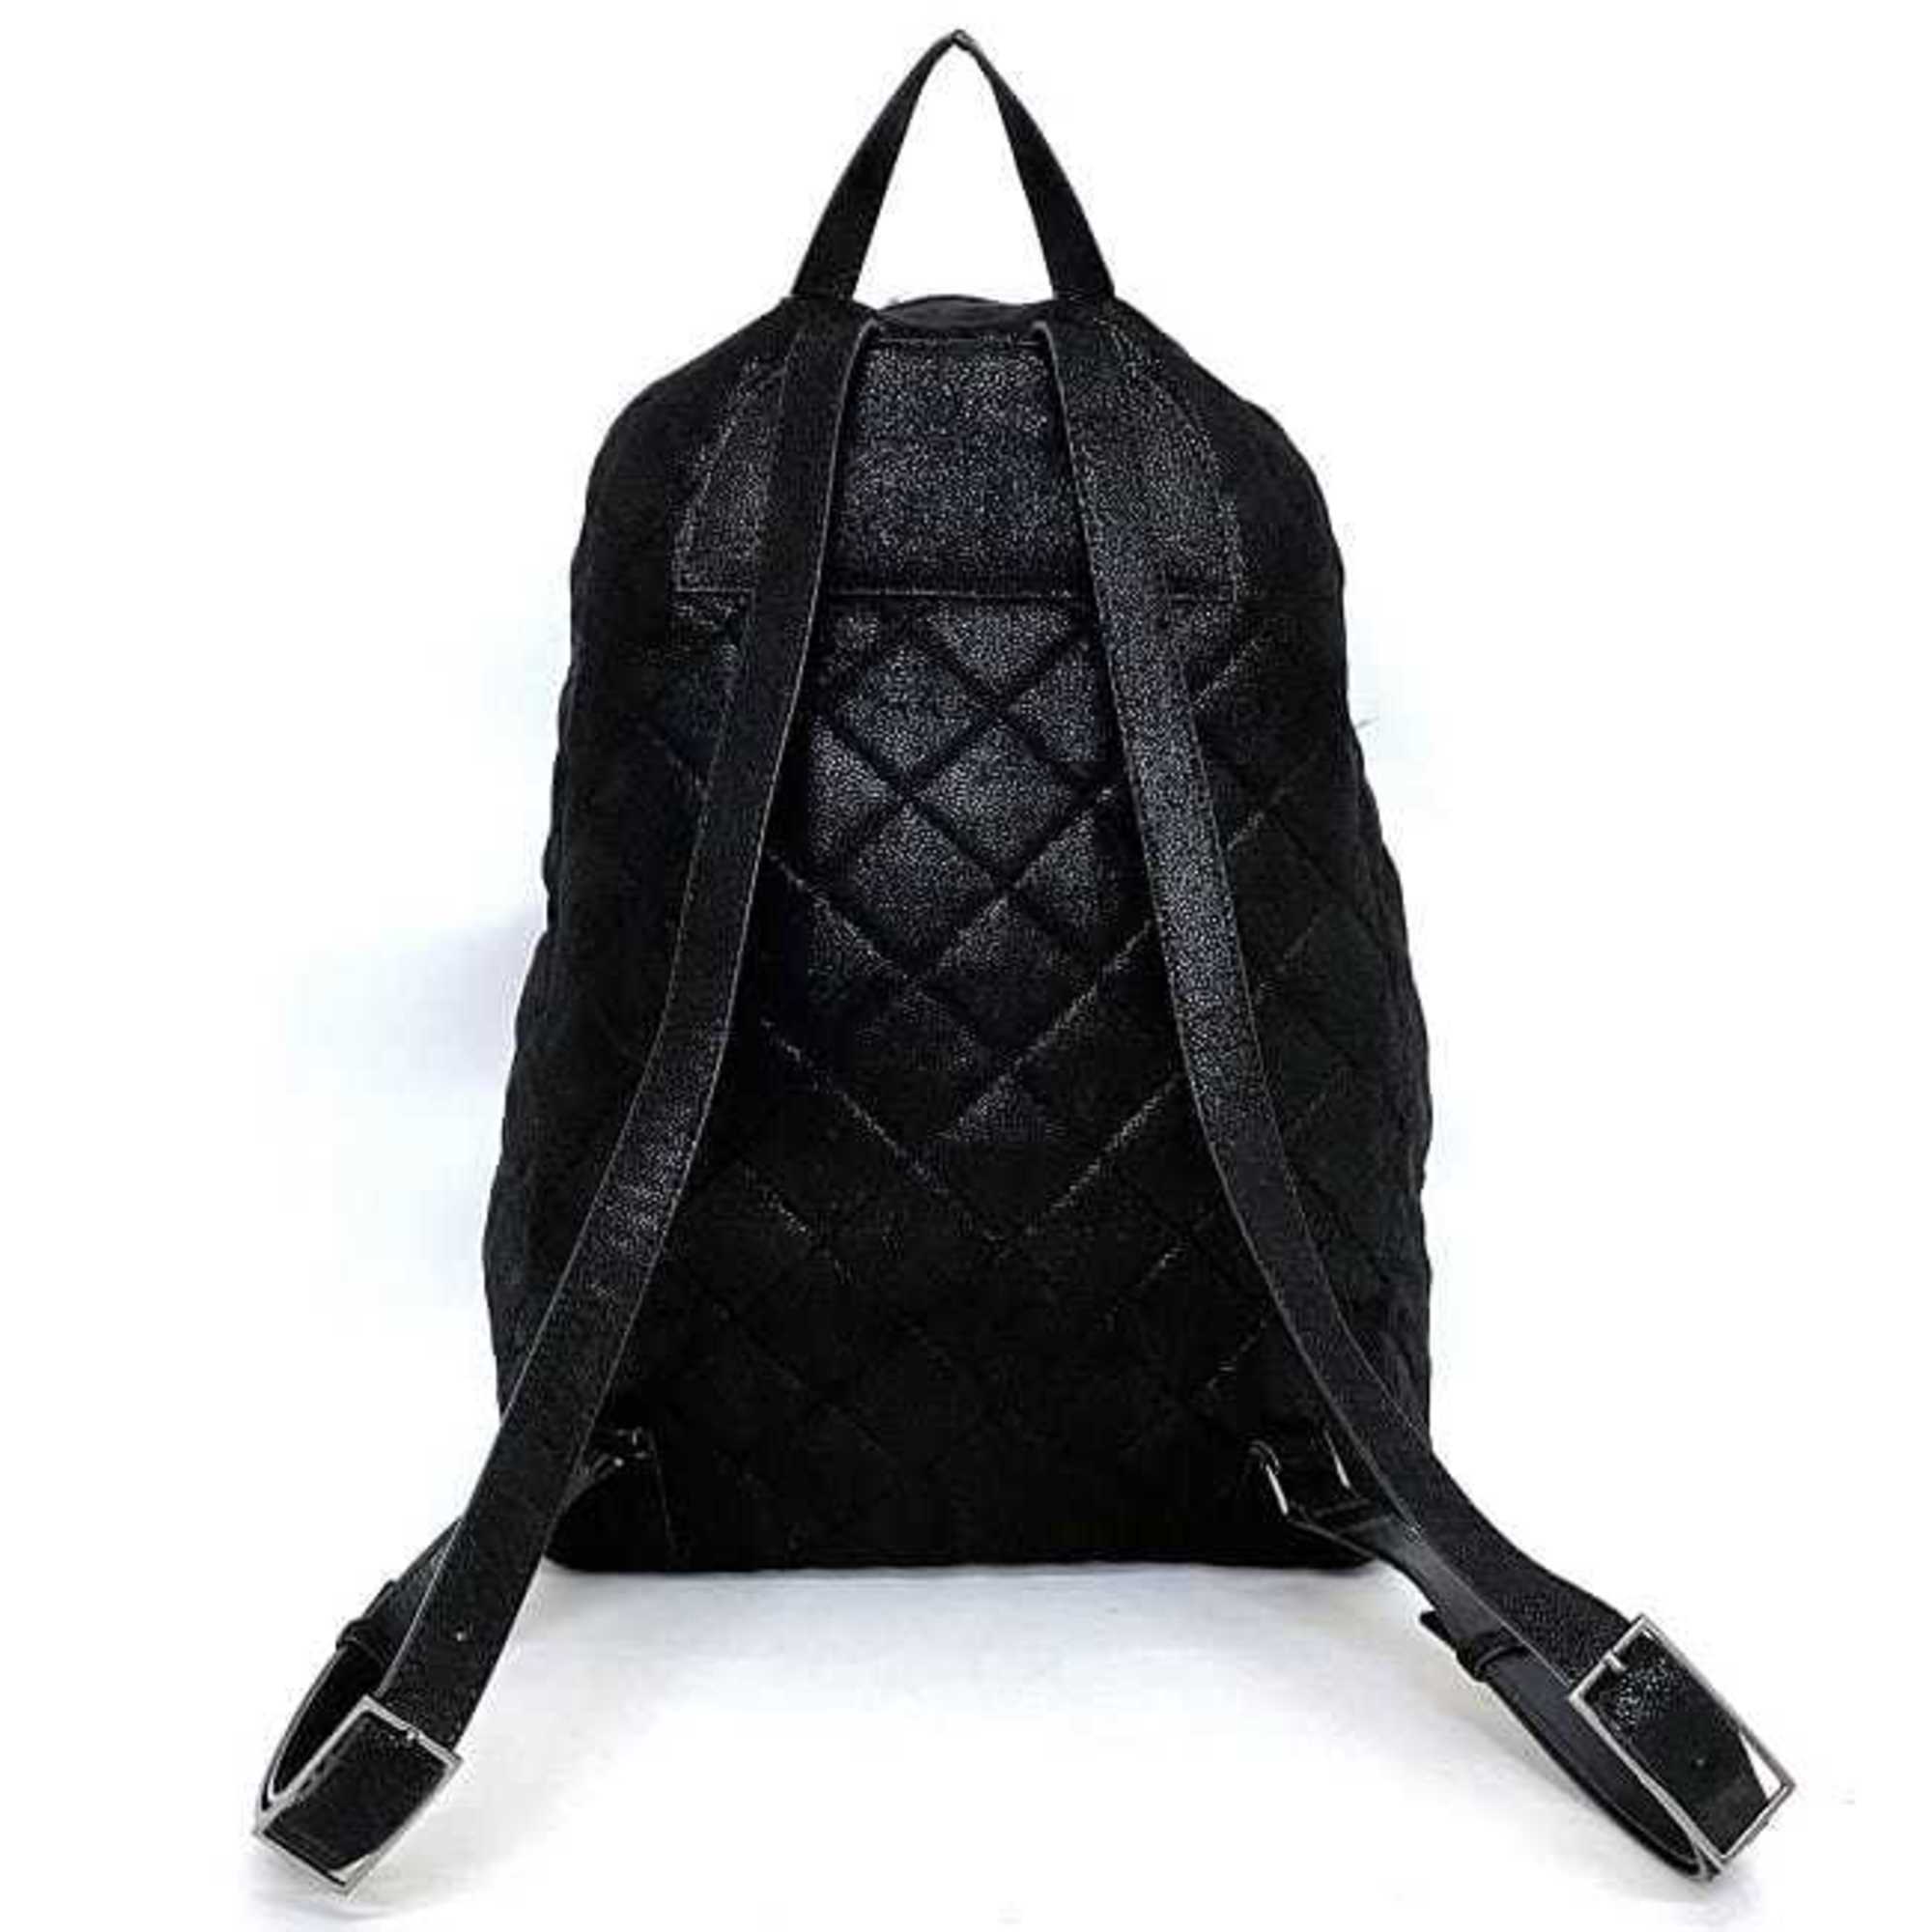 Stella McCartney Backpack Black Silver Falabella Quilted Chain Polyester Leather Metal STELLA McCARTNEY Rucksack Women's